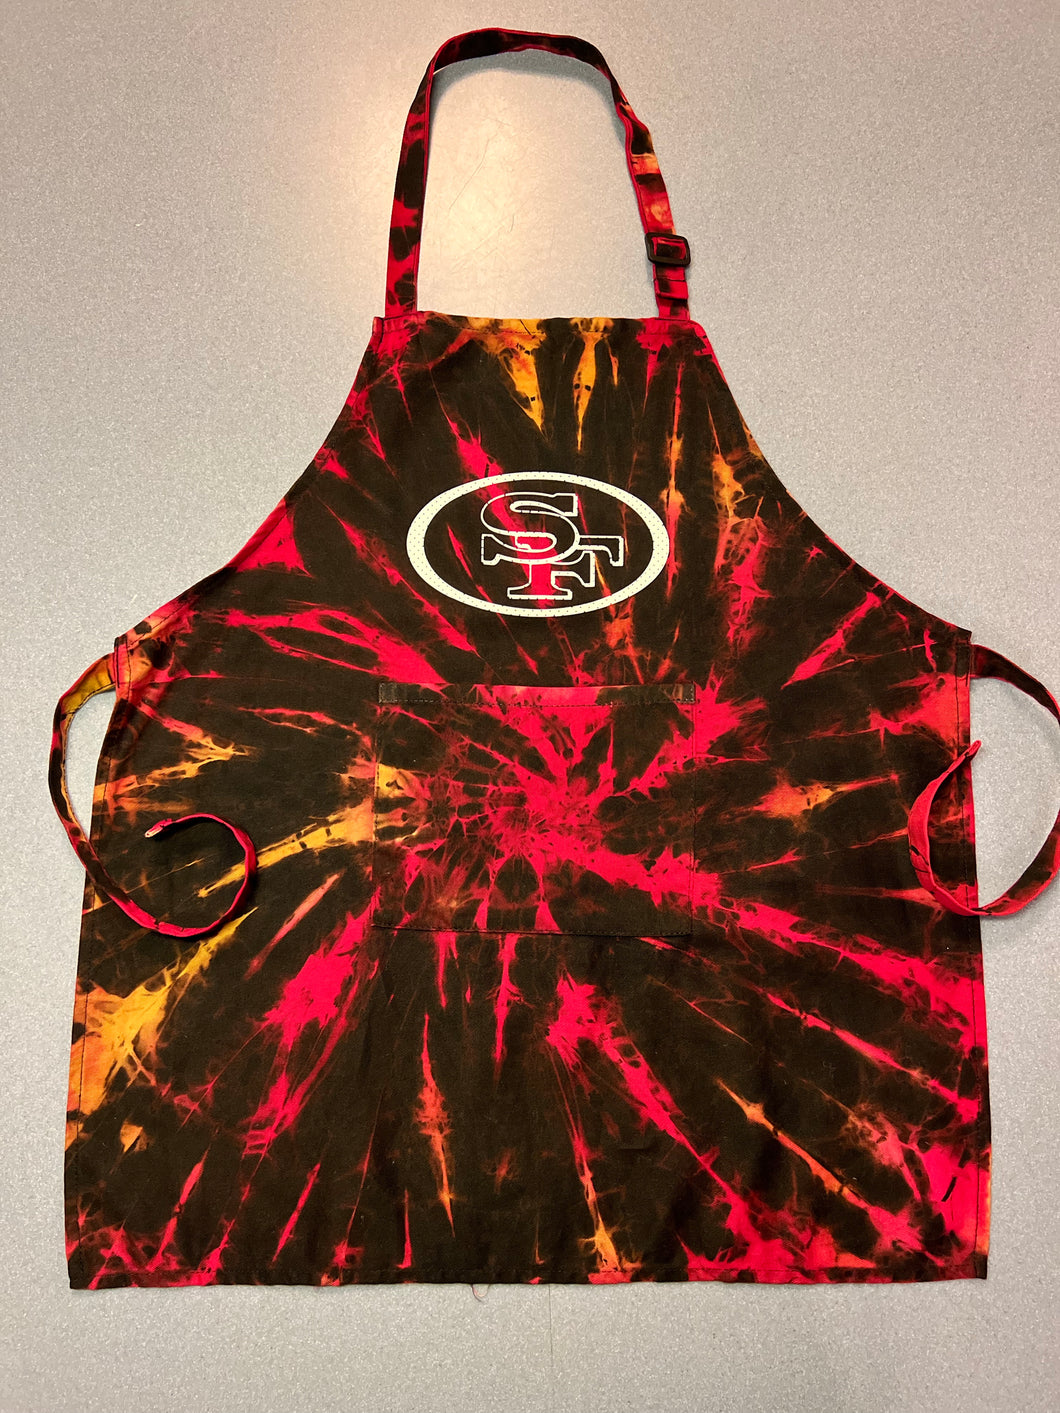 Forty-Niners Apron